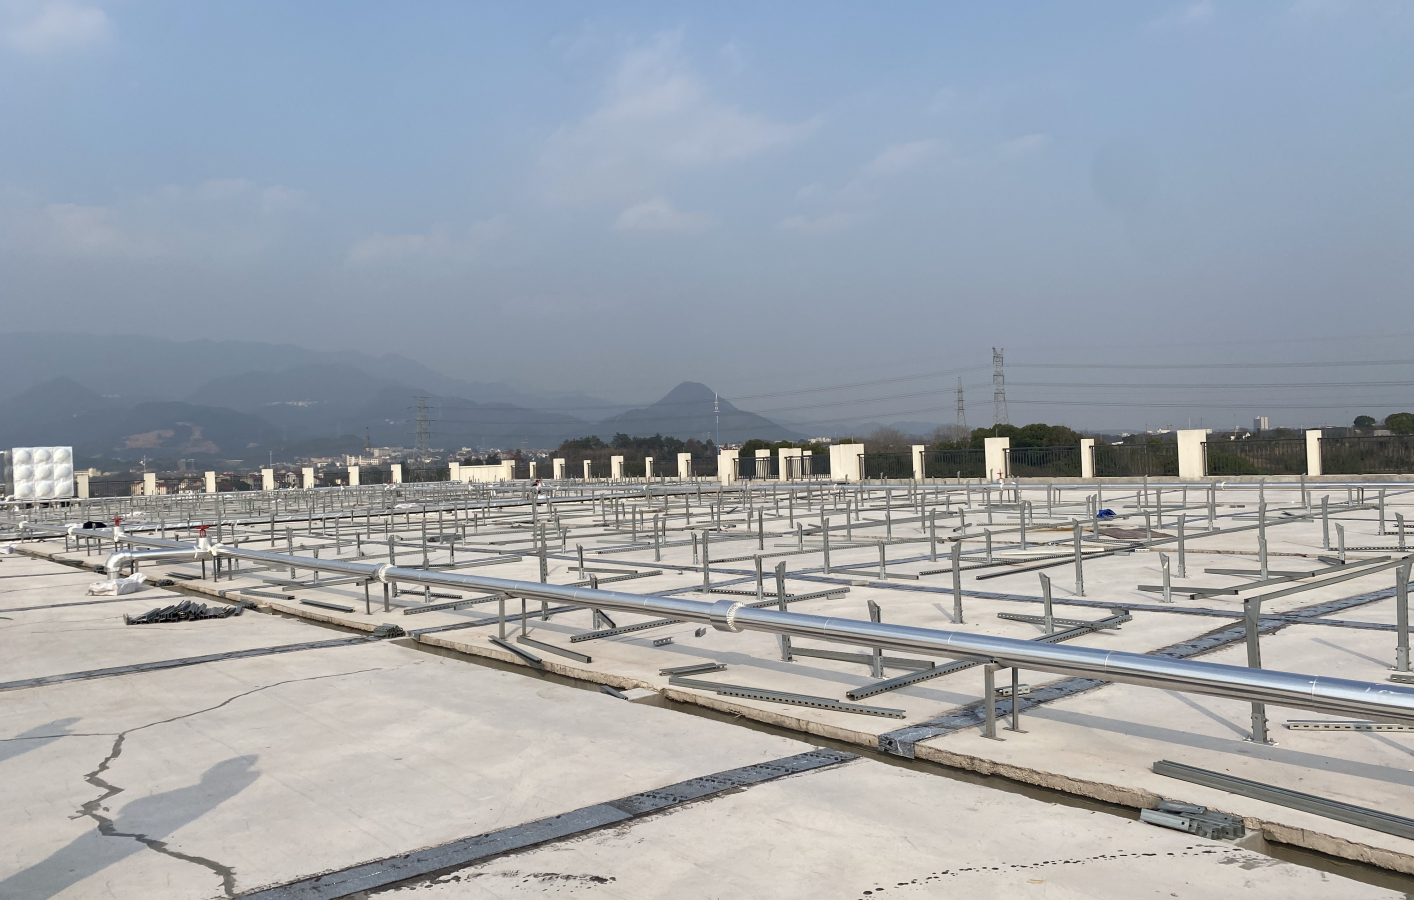 Flat Roof Solar Mounting